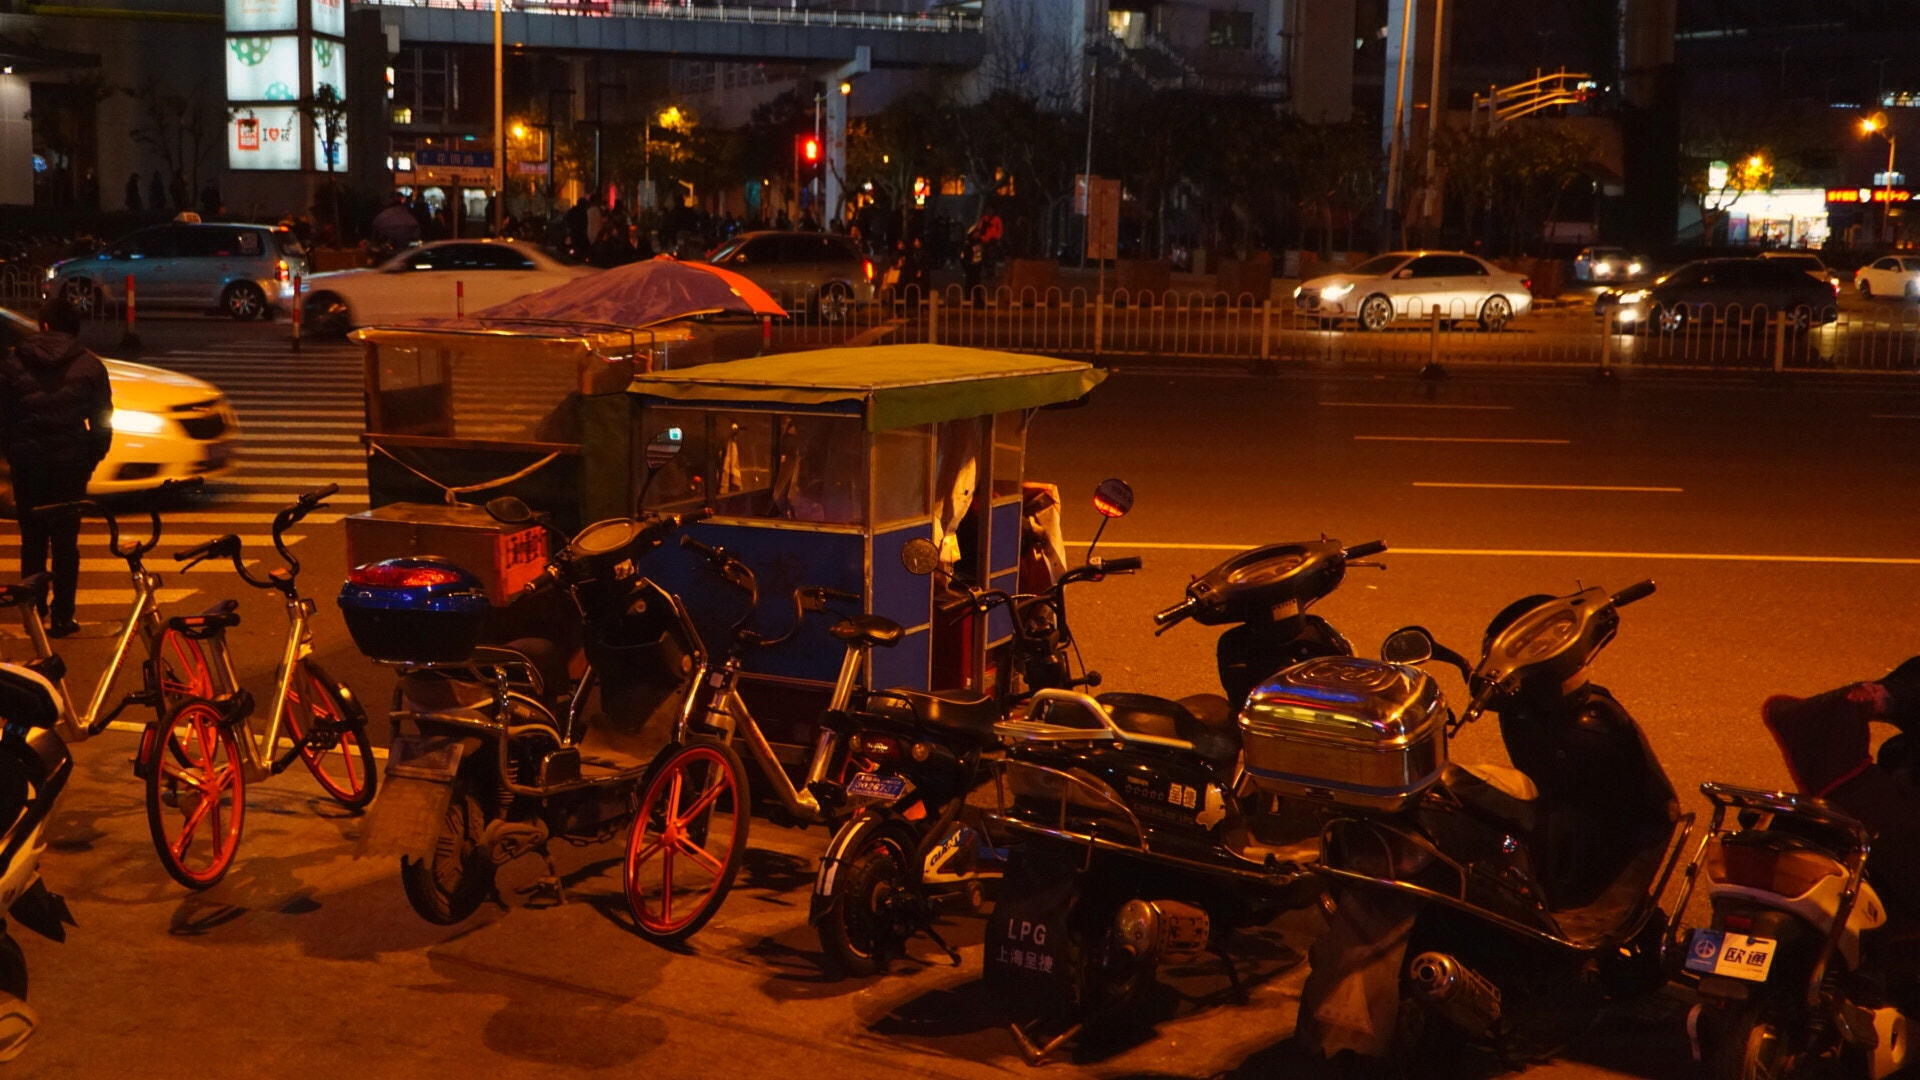 Sony a5100 sample photo. Shanghai three-wheeled taxi, illegal during the day, night is nobody's business photography